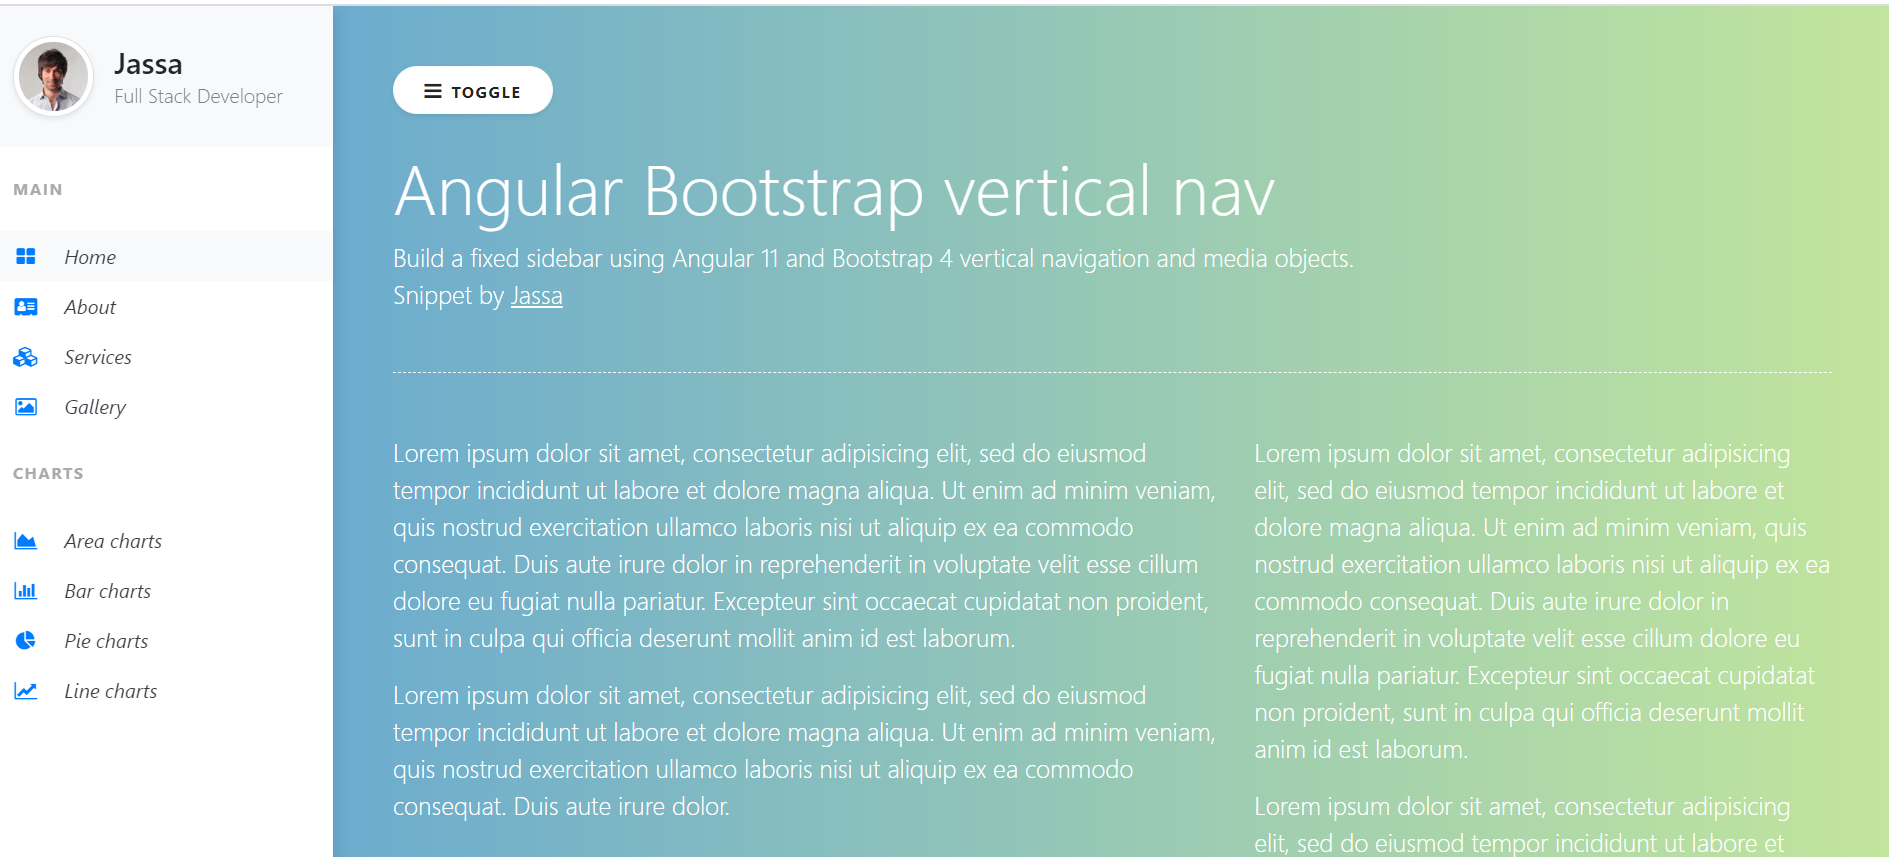 Build a fixed sidebar template using Angular 11 and Bootstrap 4 Vertical Navigation